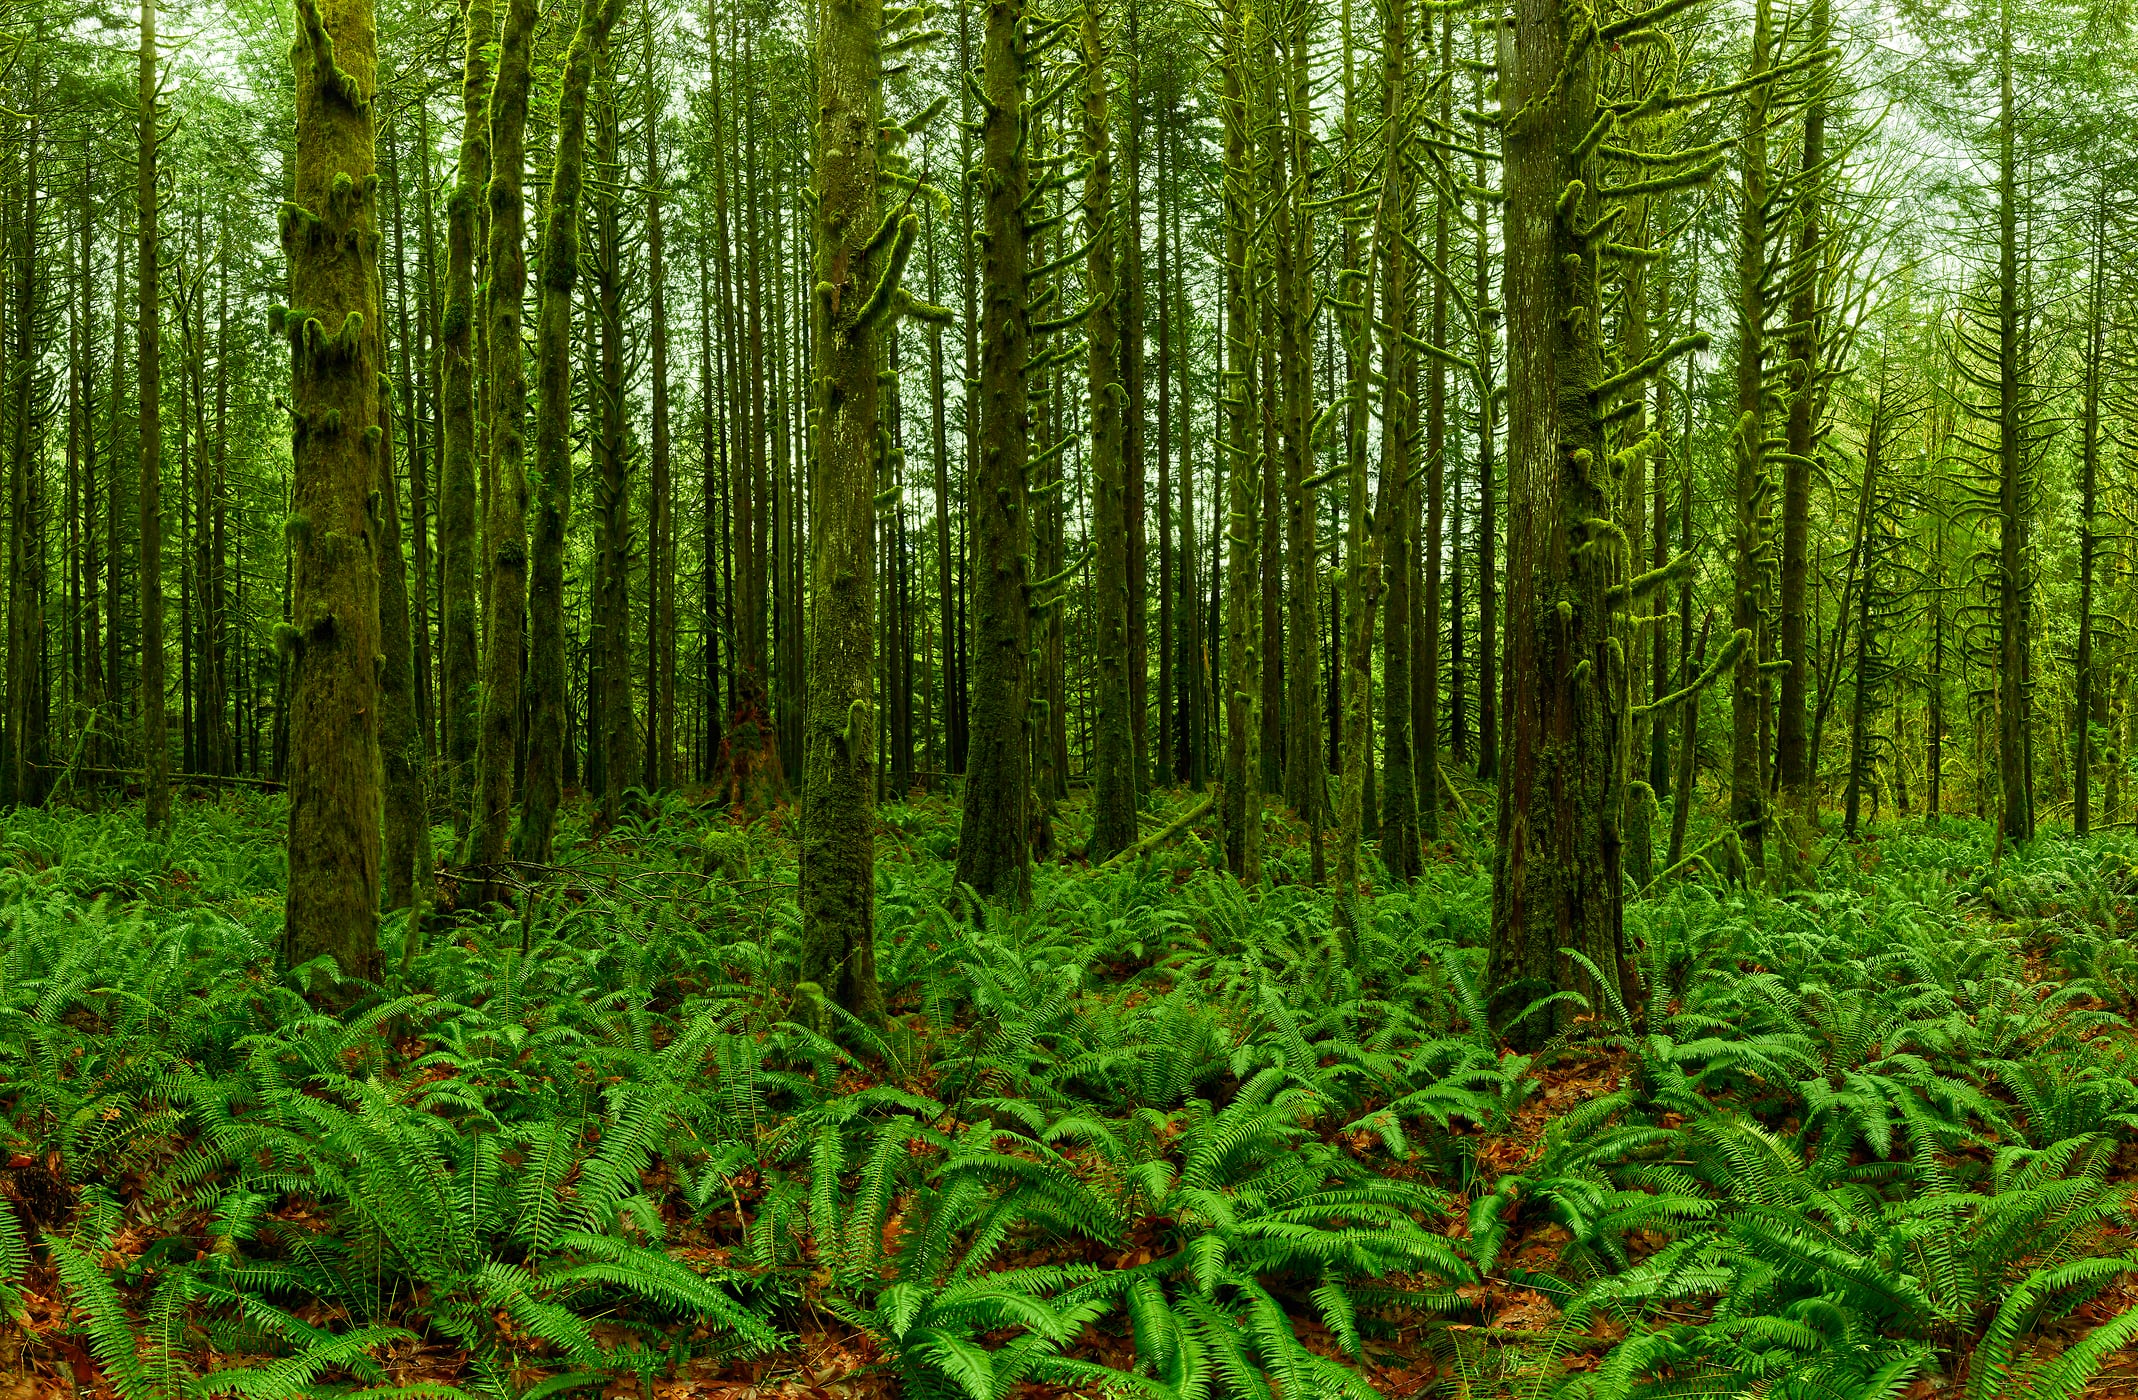 866 megapixels! A very high resolution, large-format VAST photo print of a forest with many ferns on the ground; nature photograph created by Chris Collacott